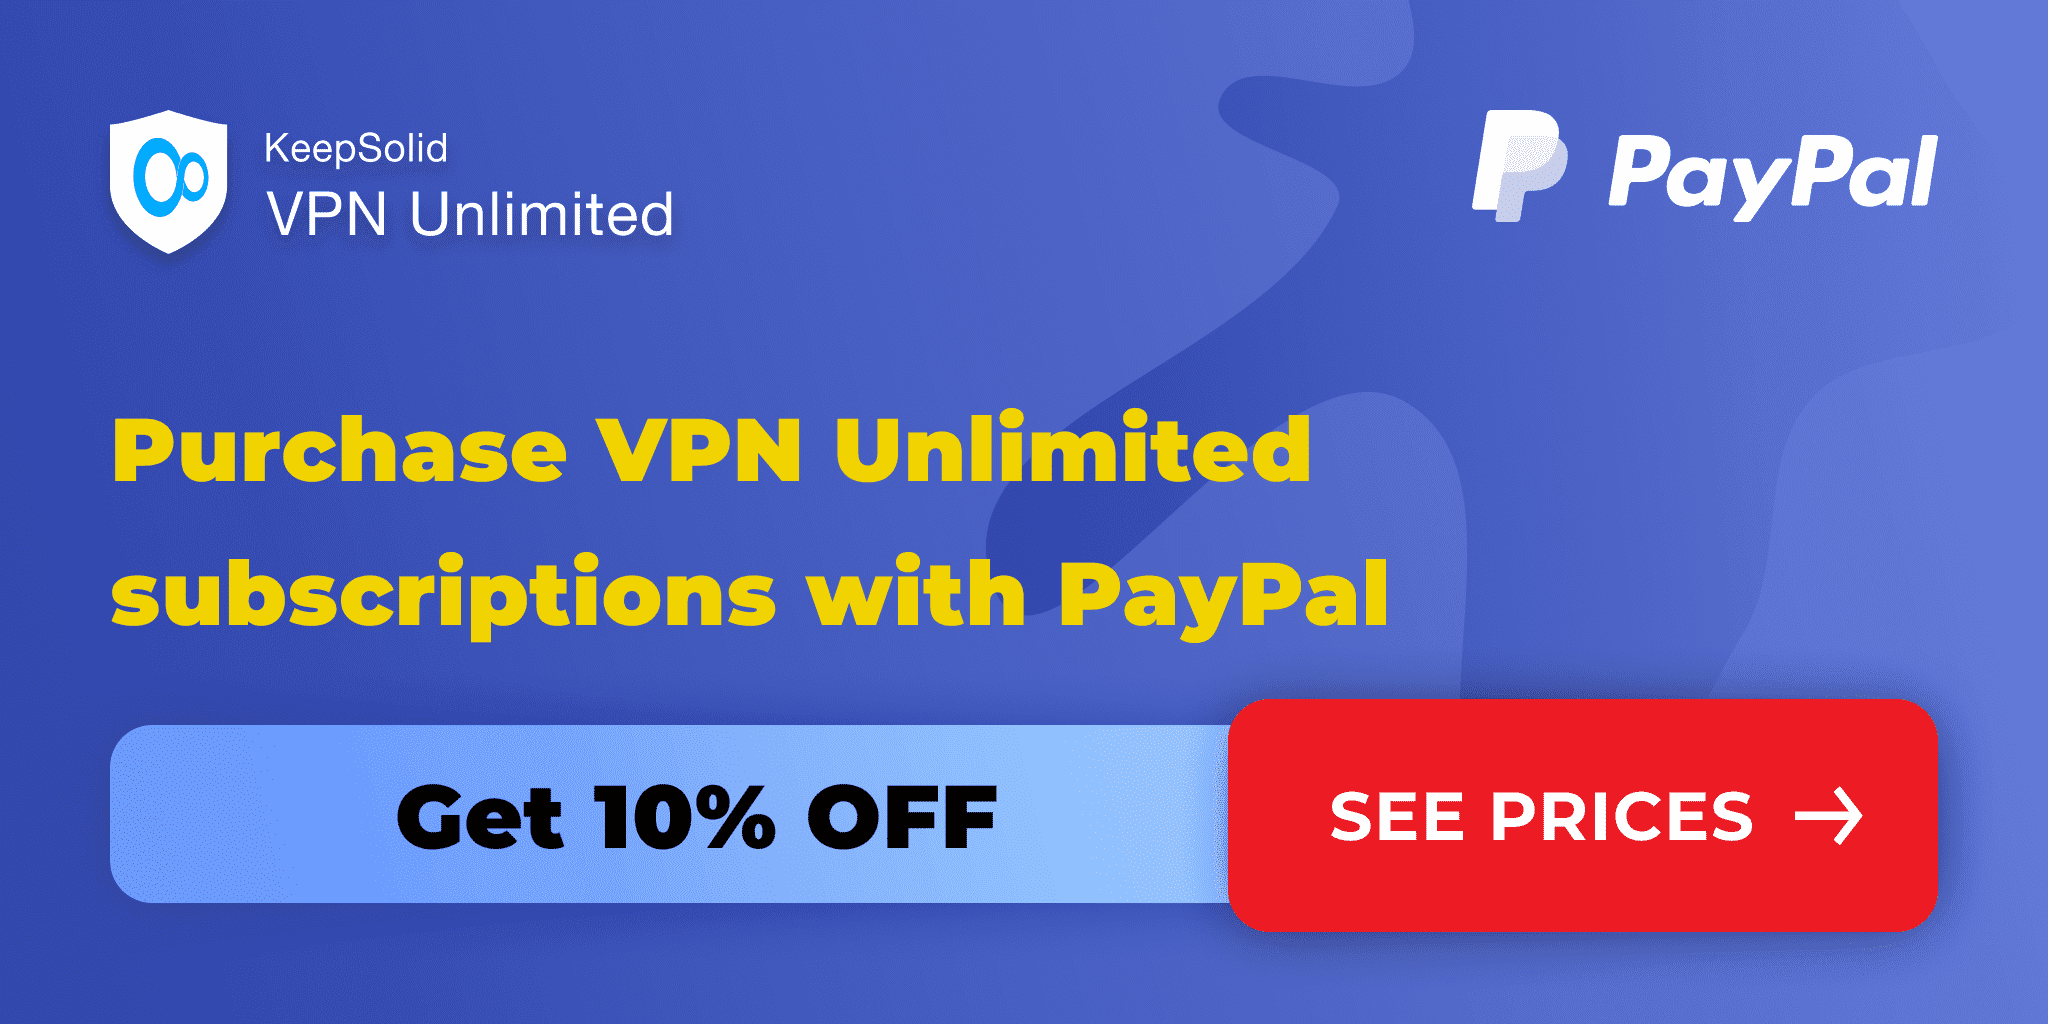 Pay with PayPal for VPN Unlimited plans